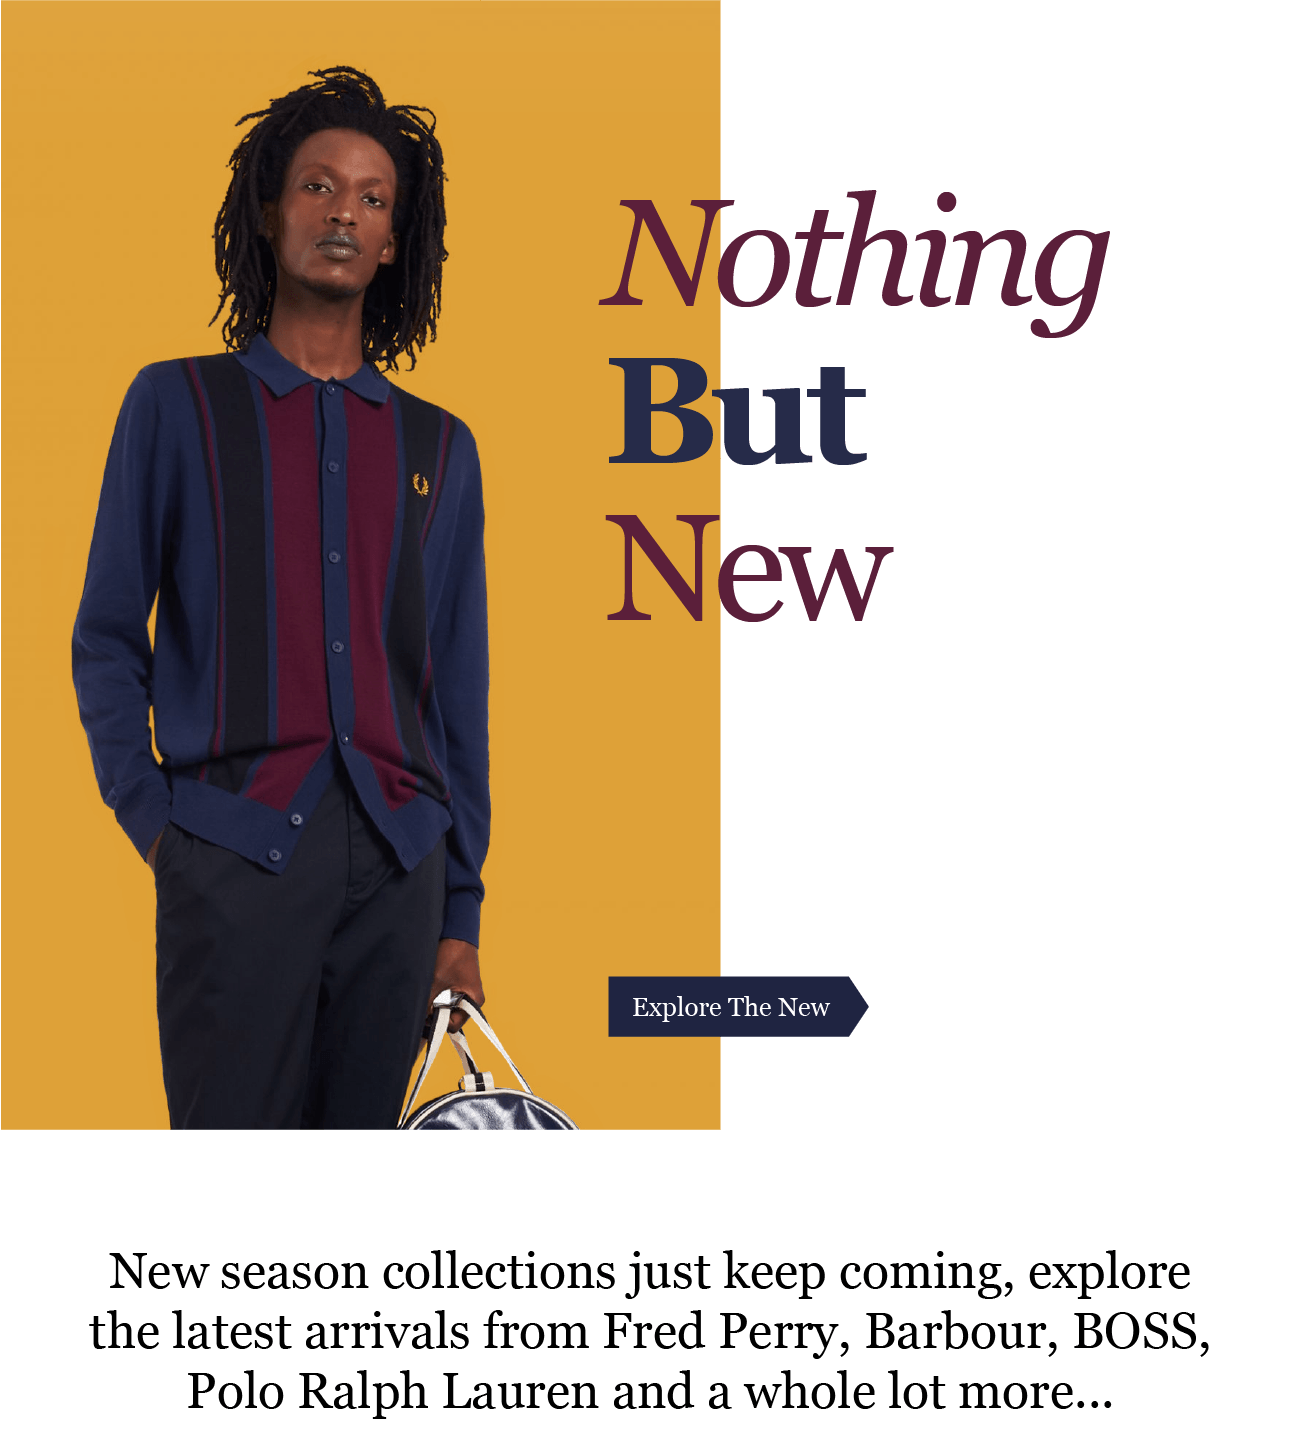 Nothing
But
New

Explore The New

New season collections just keep coming, explore
the latest arrivals from Fred Perry, Barbour, BOSS,
Polo Ralph Lauren and a whole lot more...
